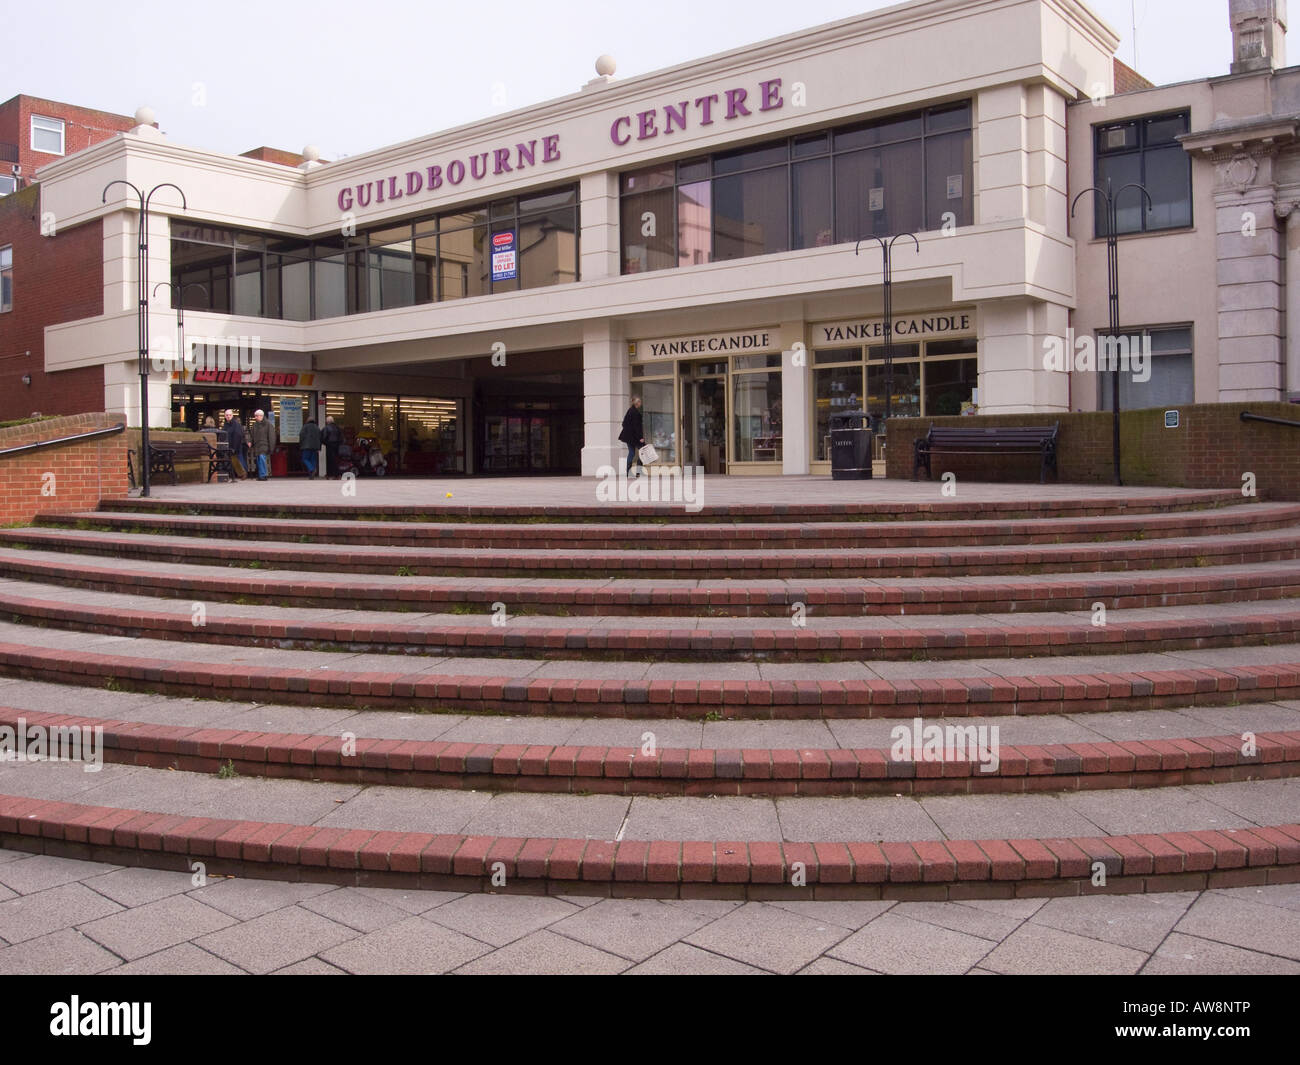 The front entrance to the Guildbourne Centre, Worthing, West Sussex, UK Stock Photo